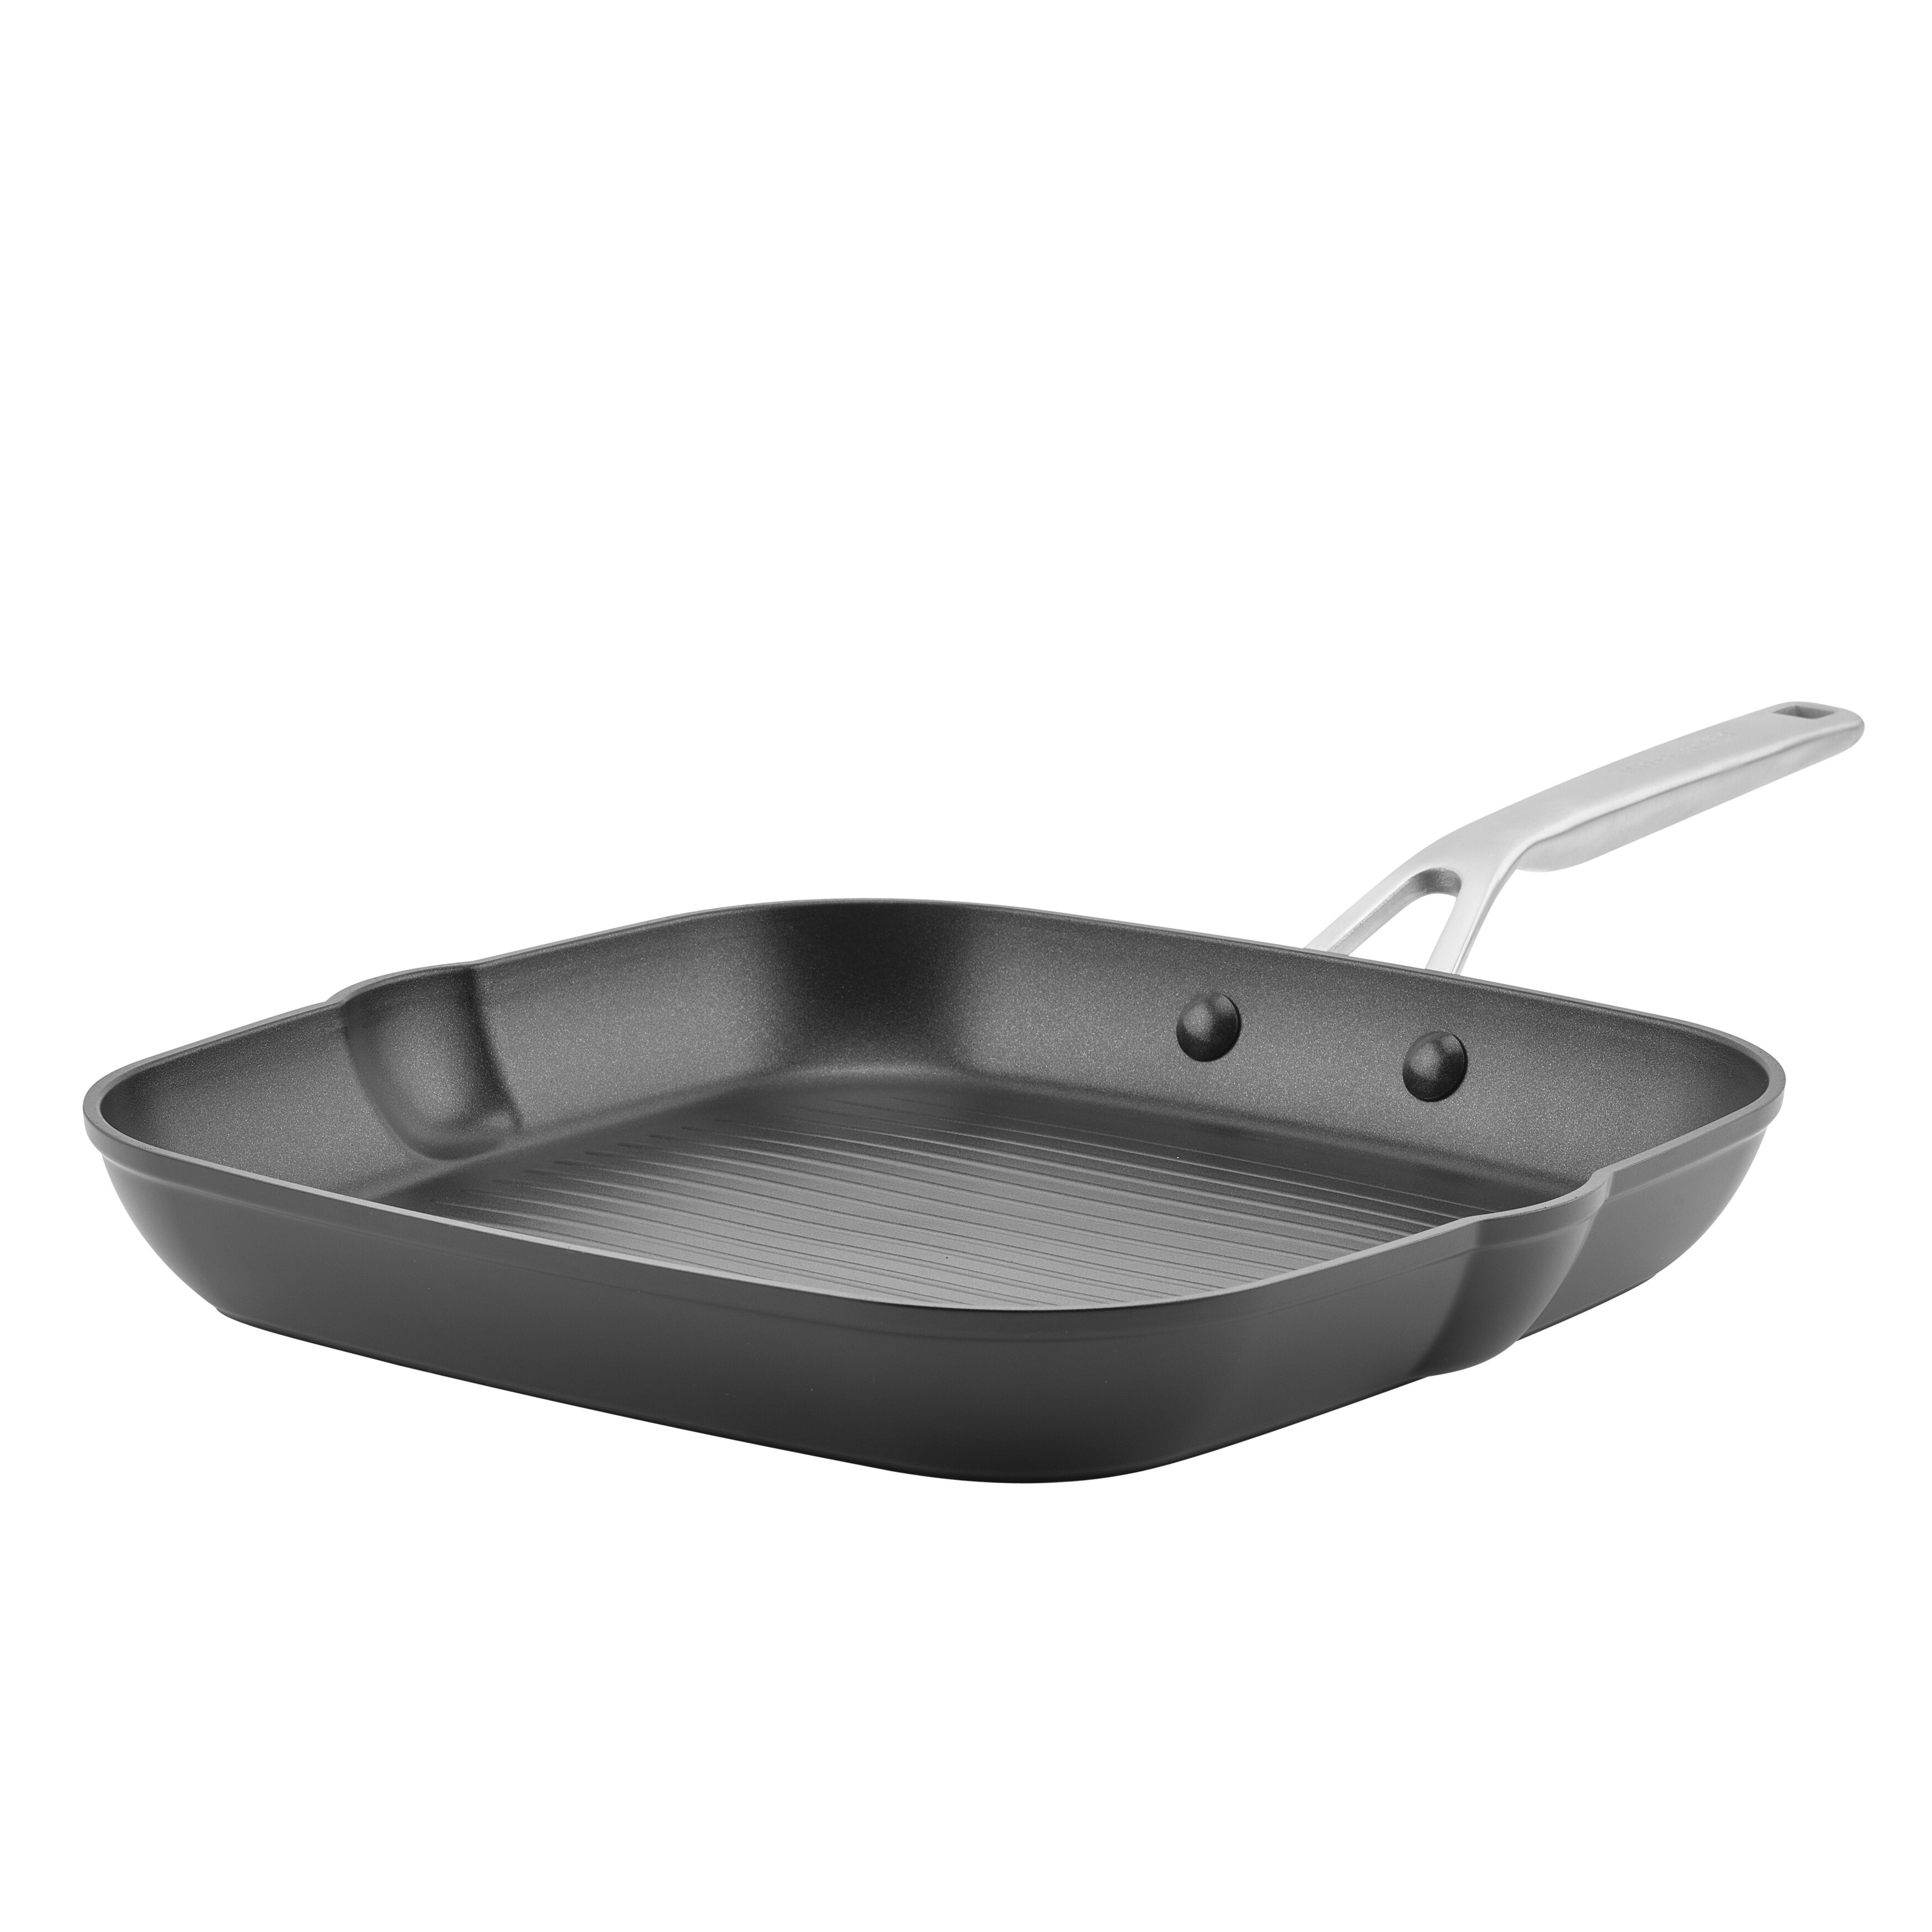 KitchenAid Hard Anodized Induction Nonstick Stovetop Grill Pan, 11.25-Inch,  Matte Black 11.25